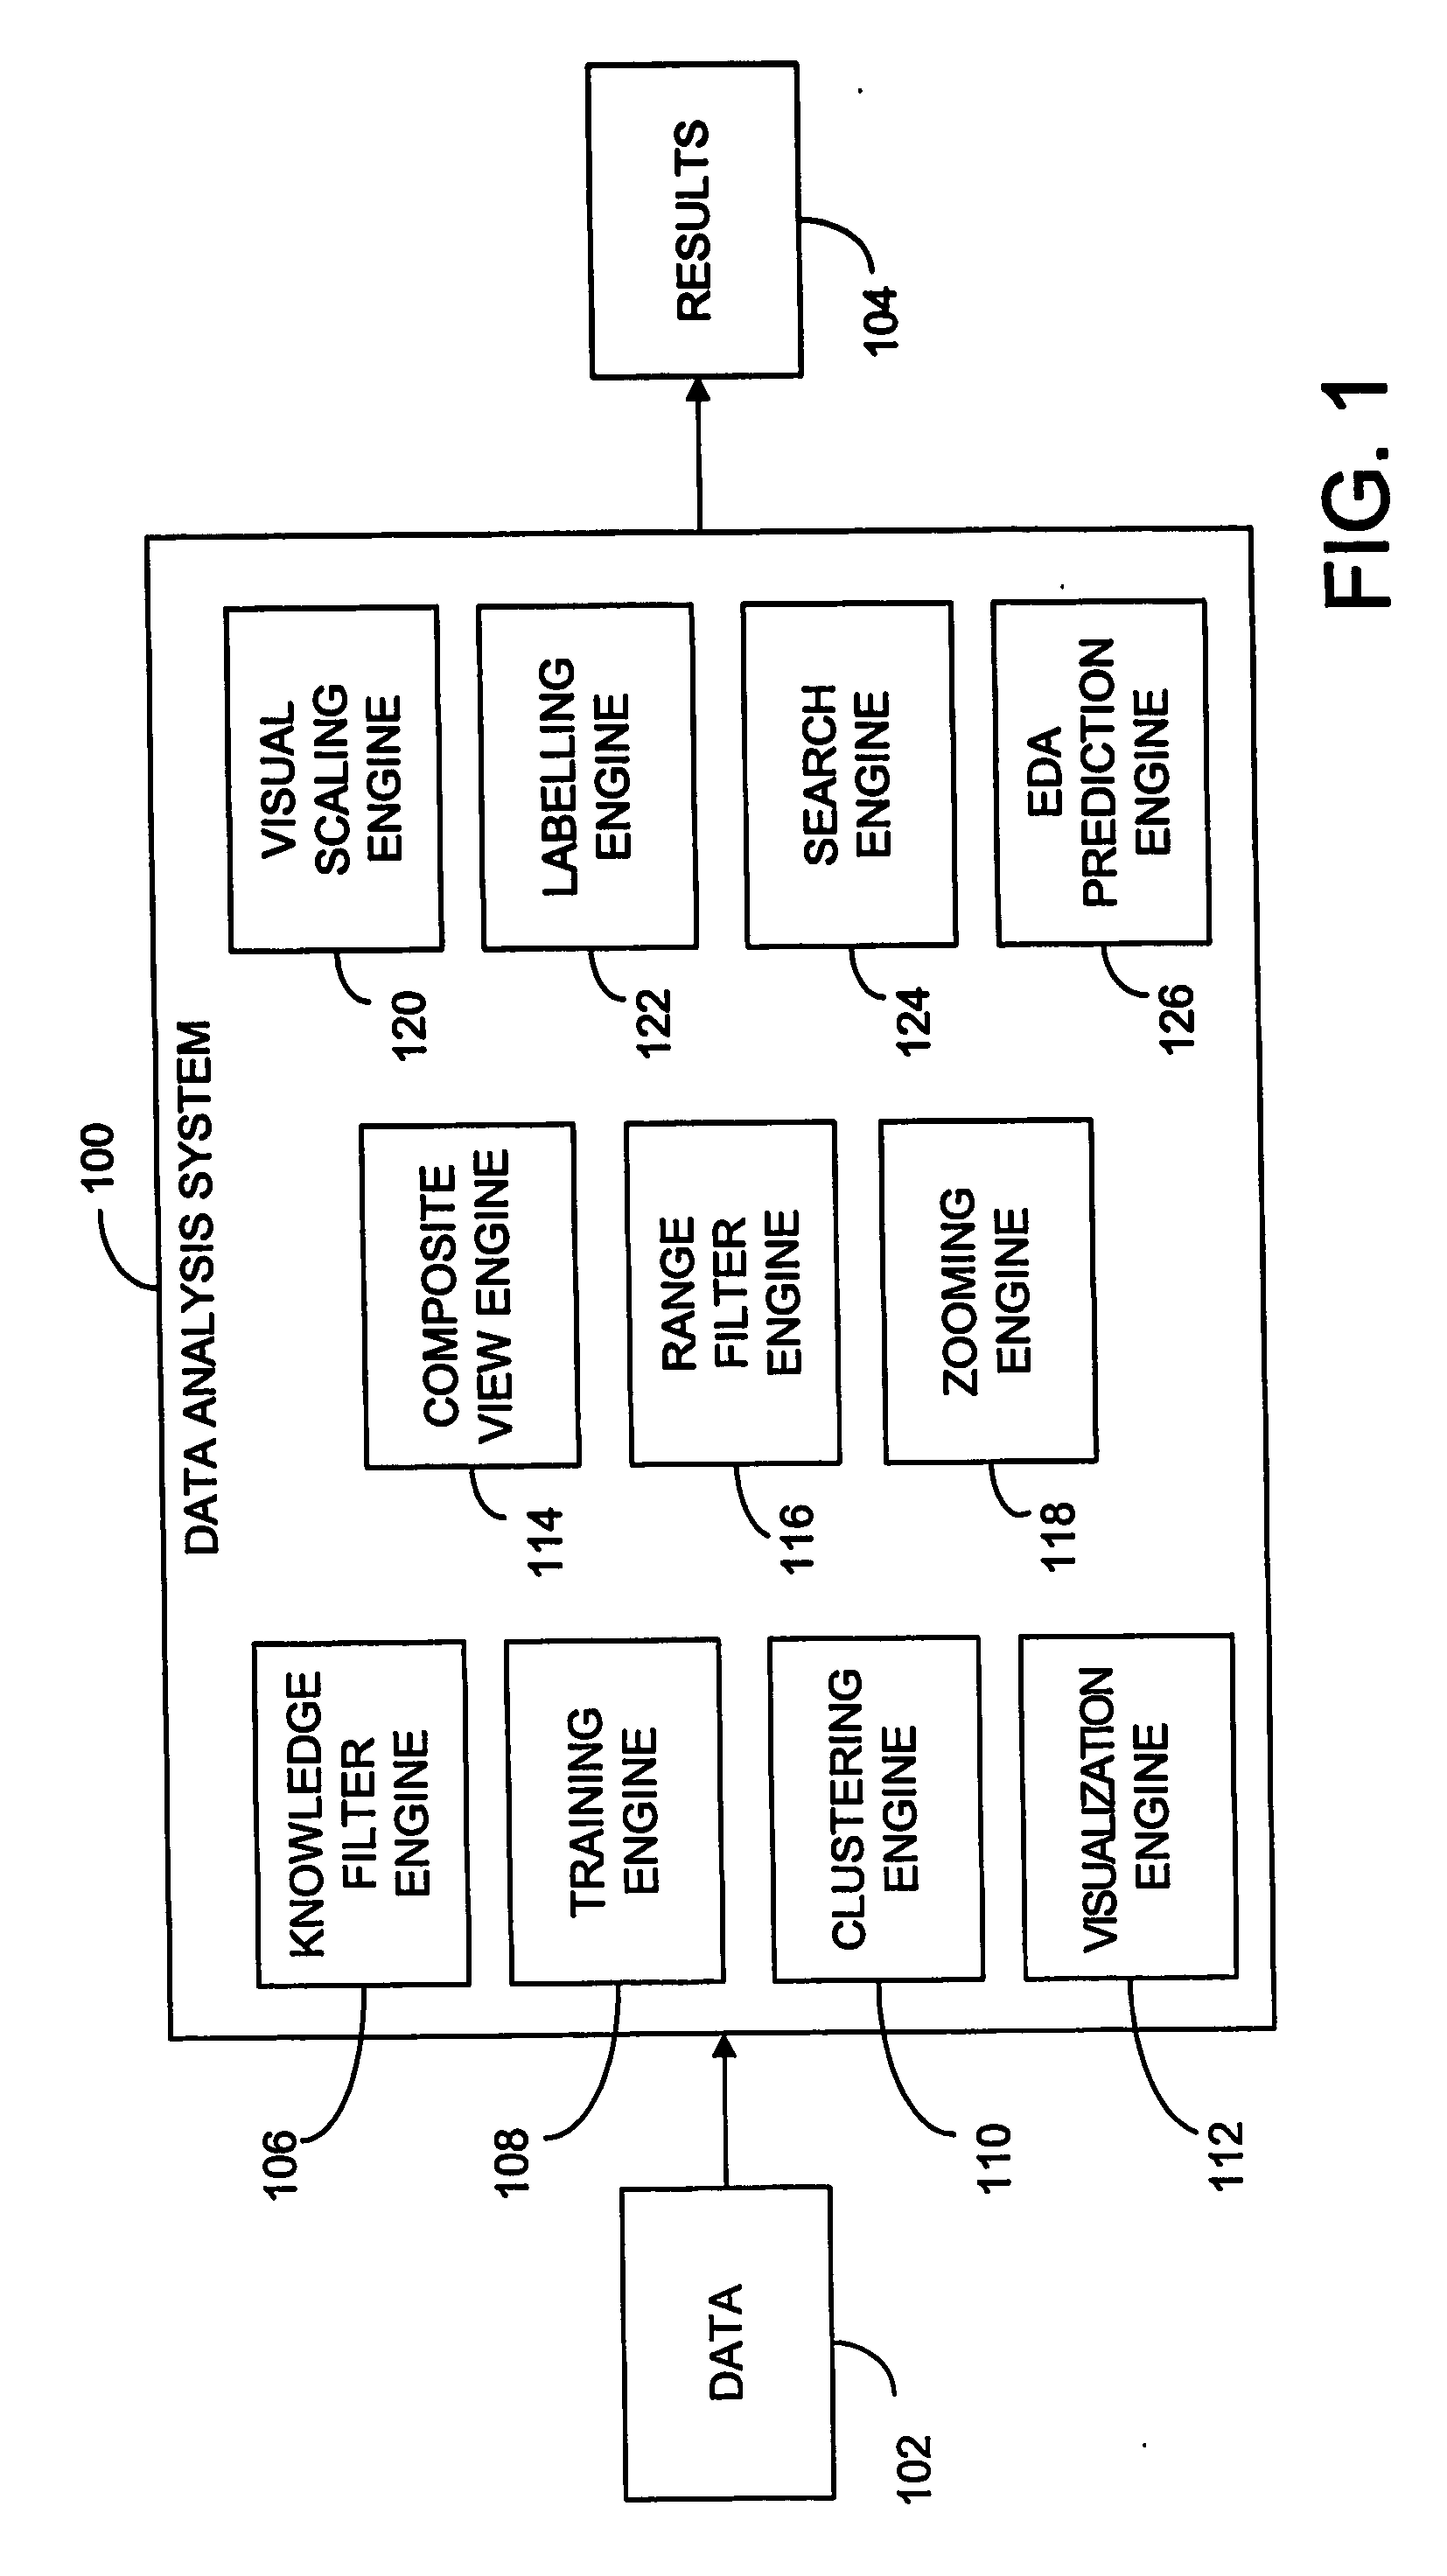 Method and system of data analysis using neural networks